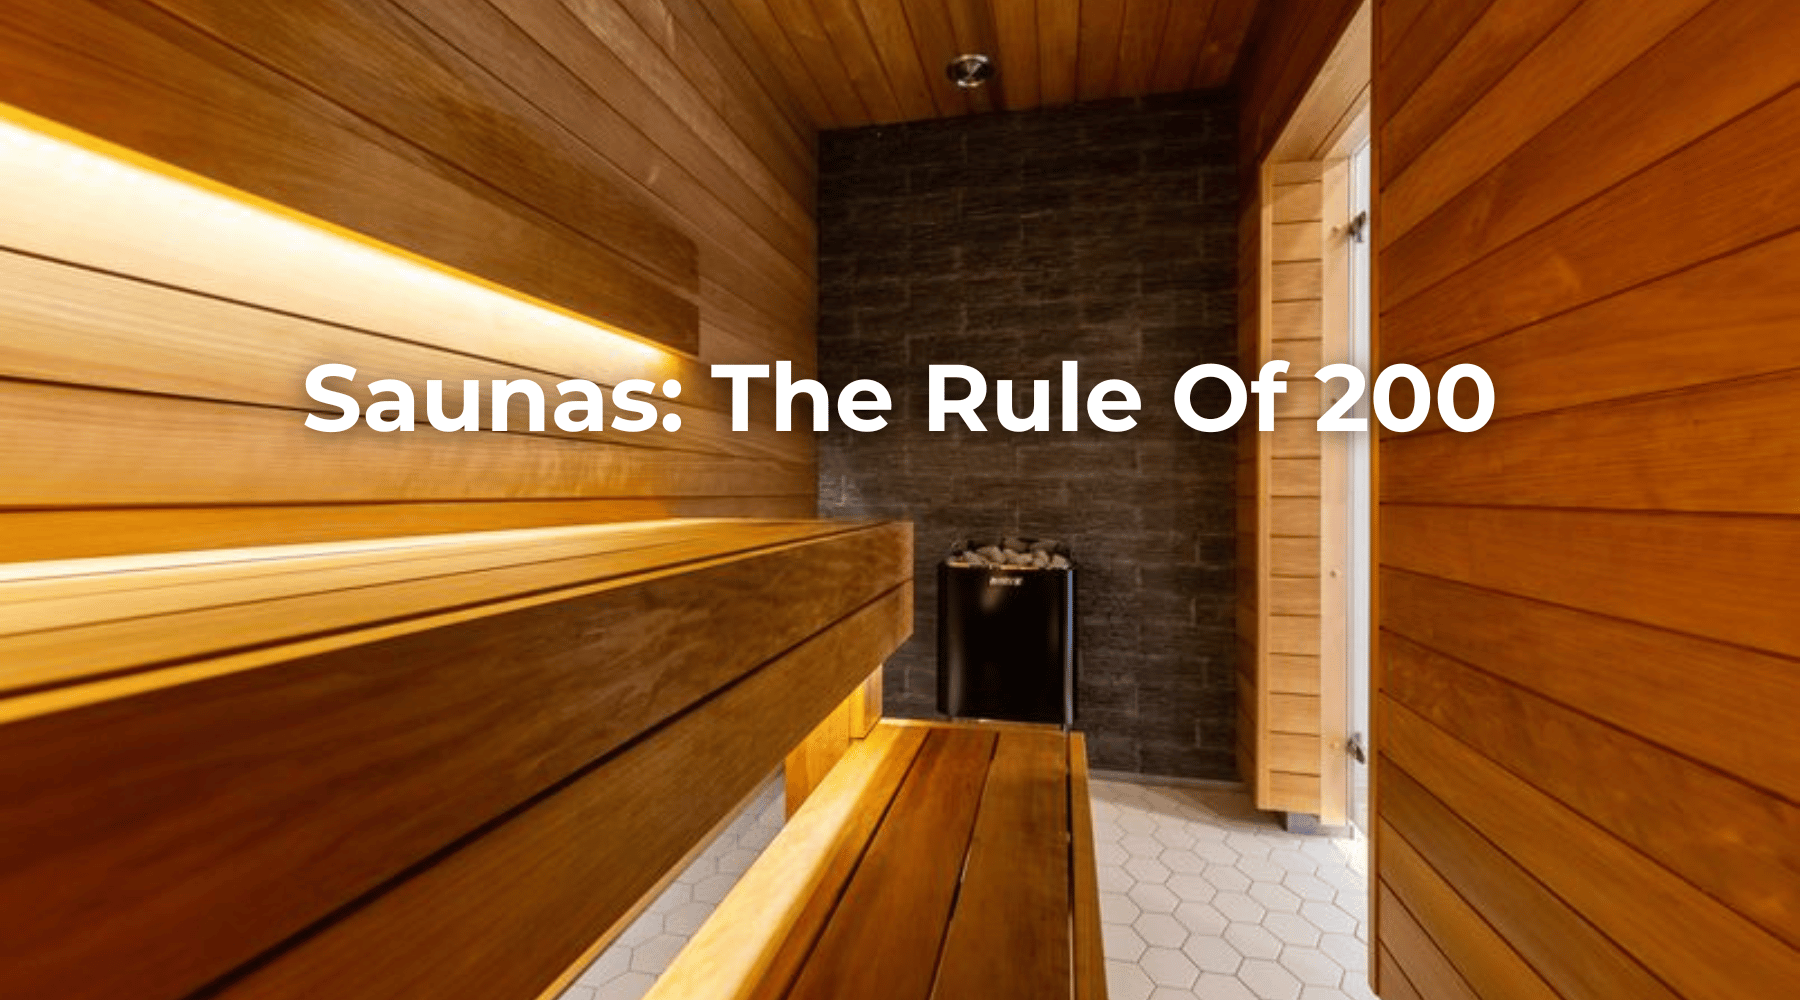 The Rule of 200 in a sauna – balancing temperature and humidity.